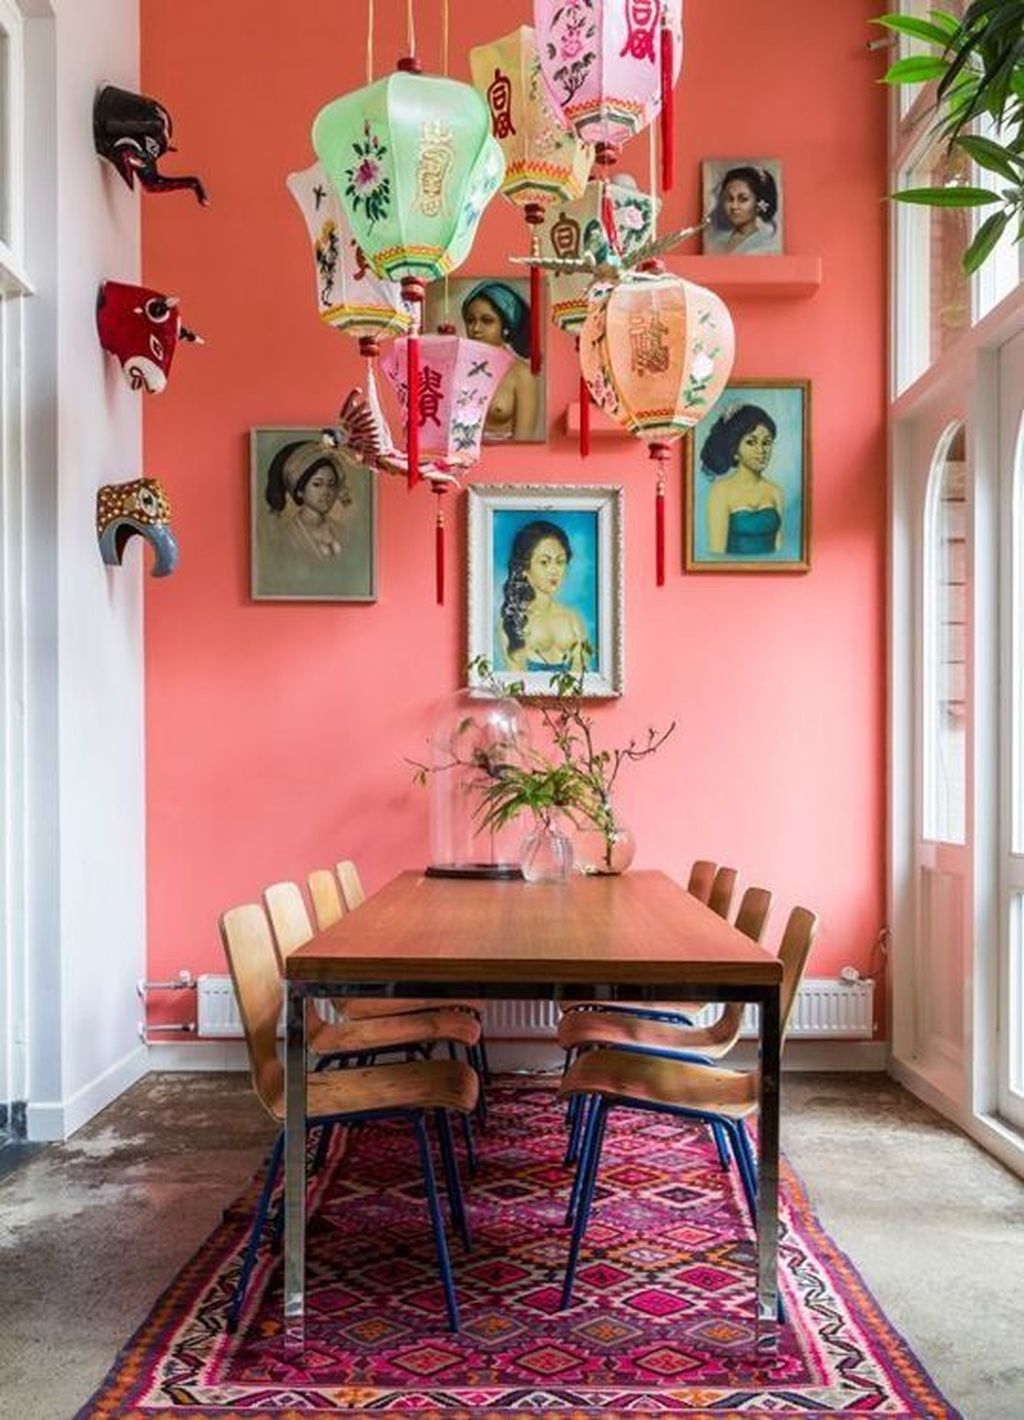 Best Ideas To Bring A Pop Of Bright Color Into Your Interior Design 13